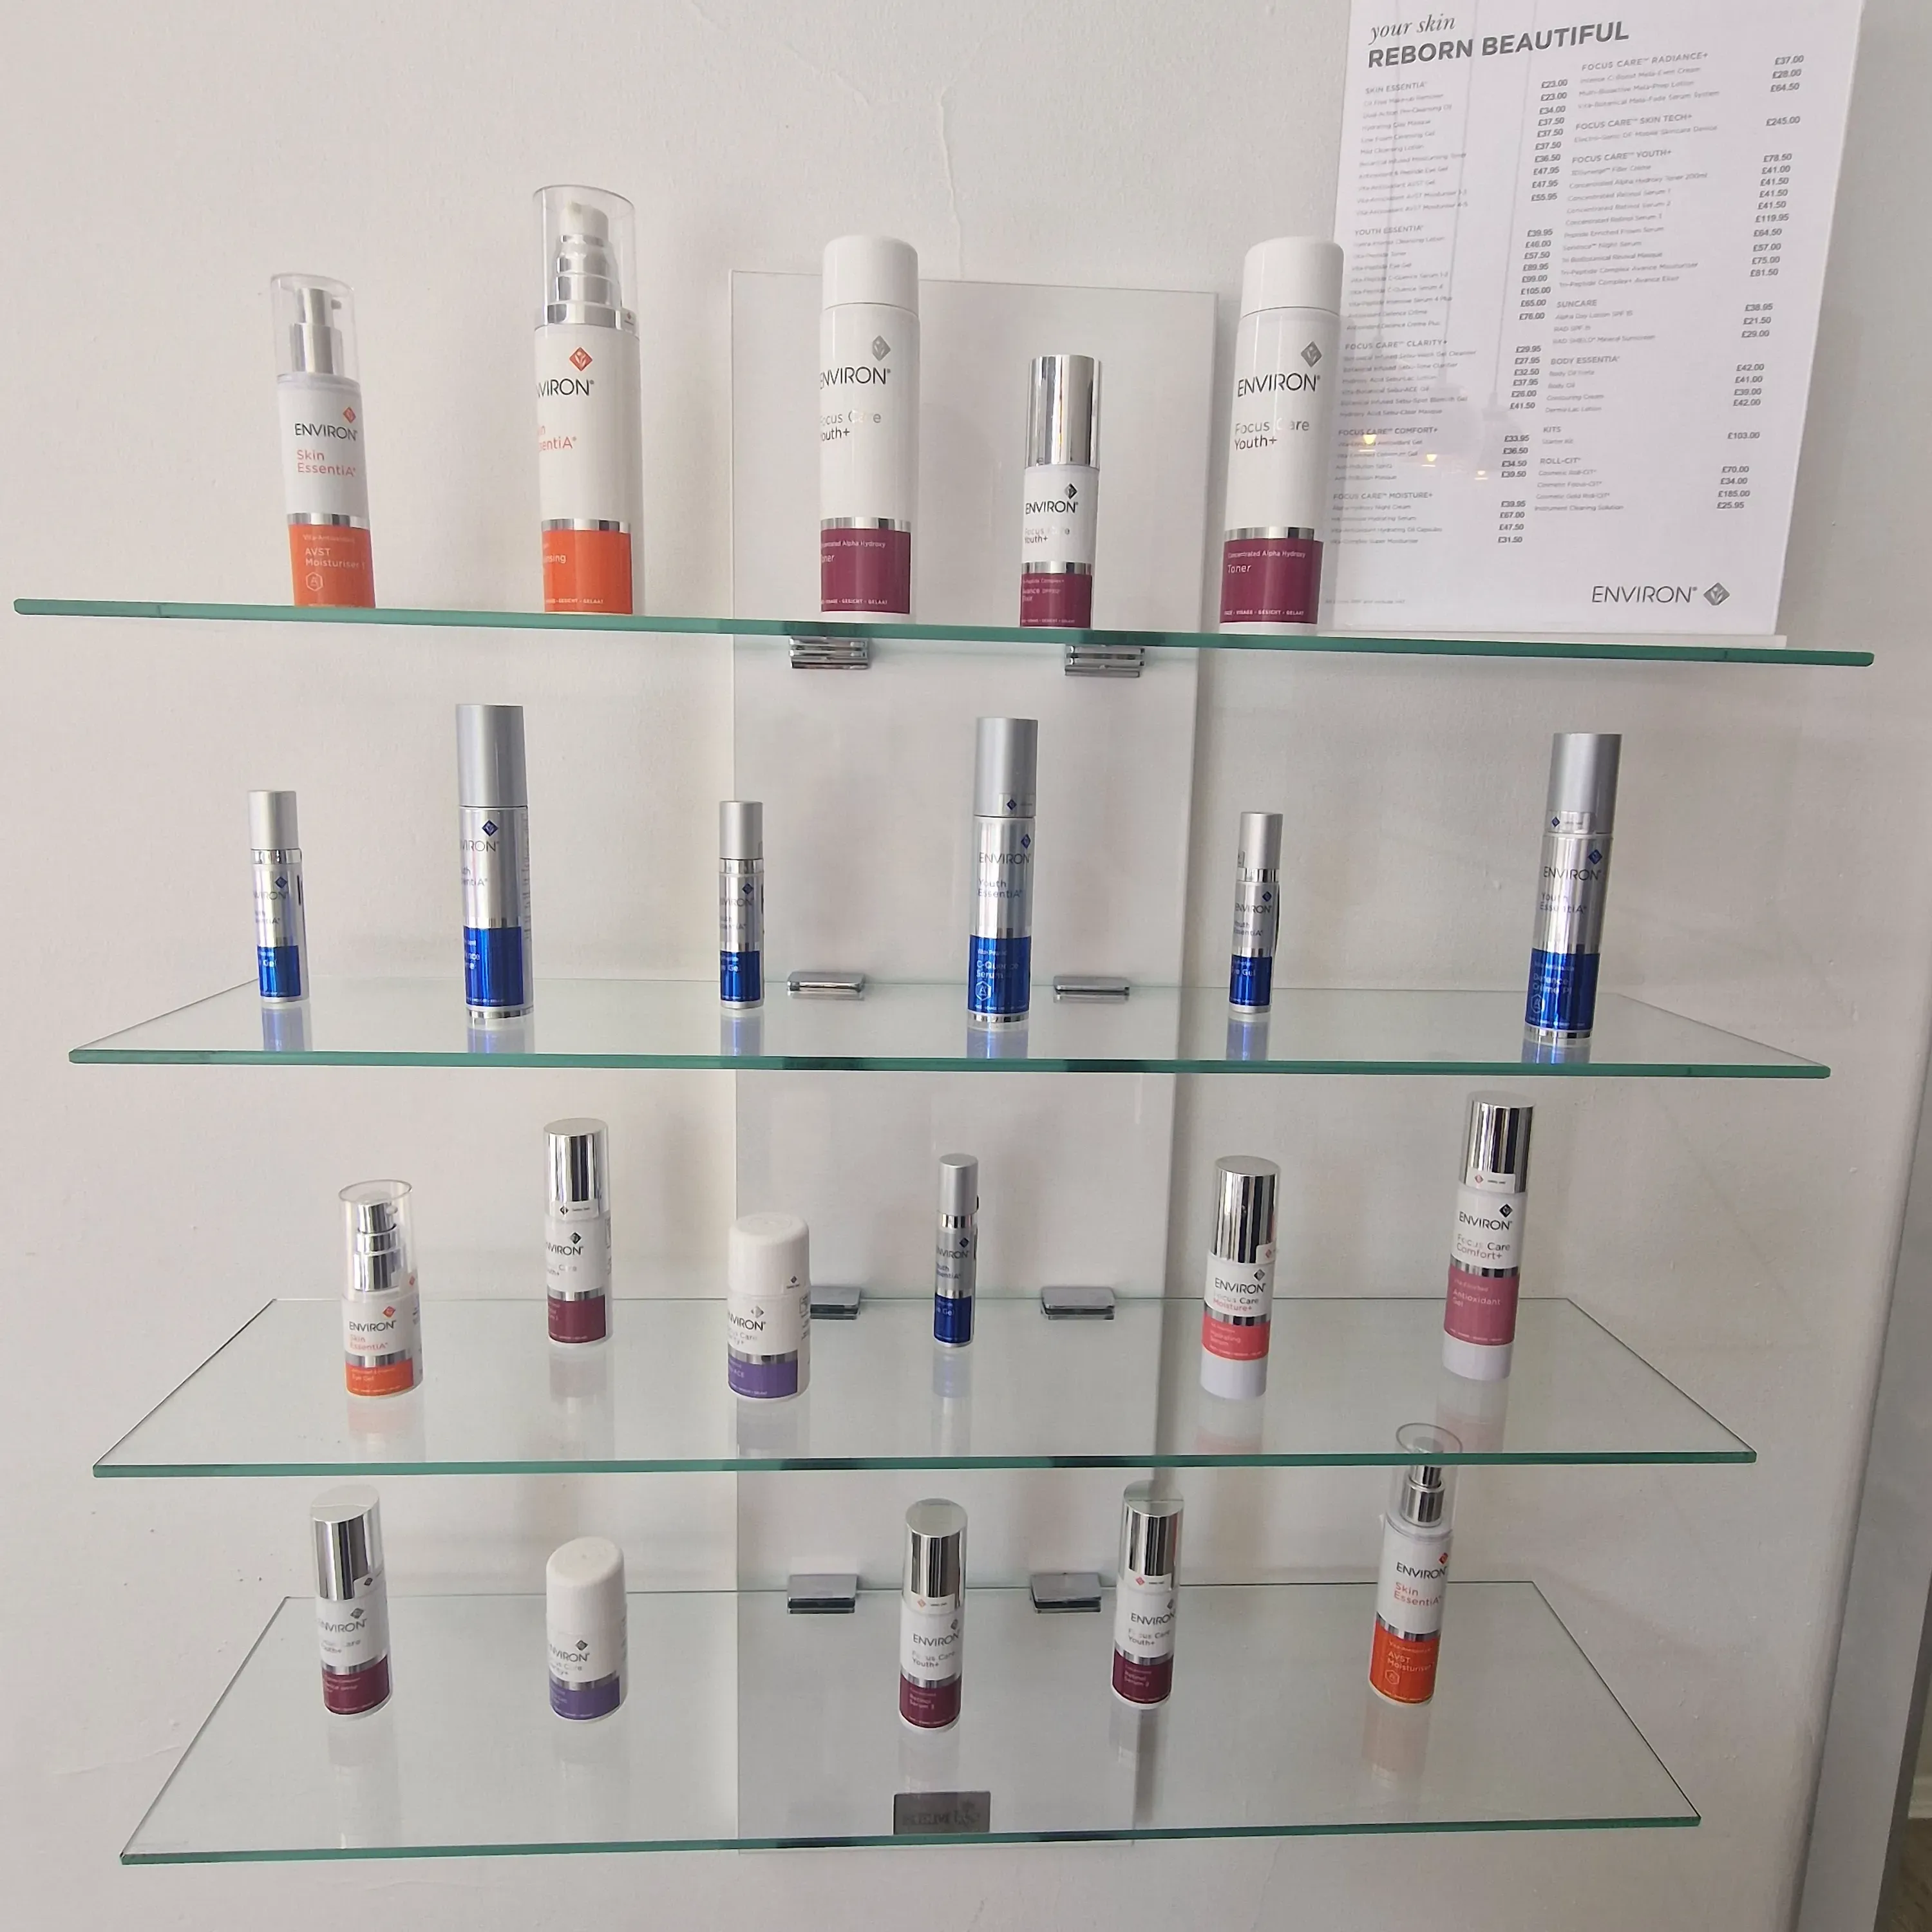 more environ products